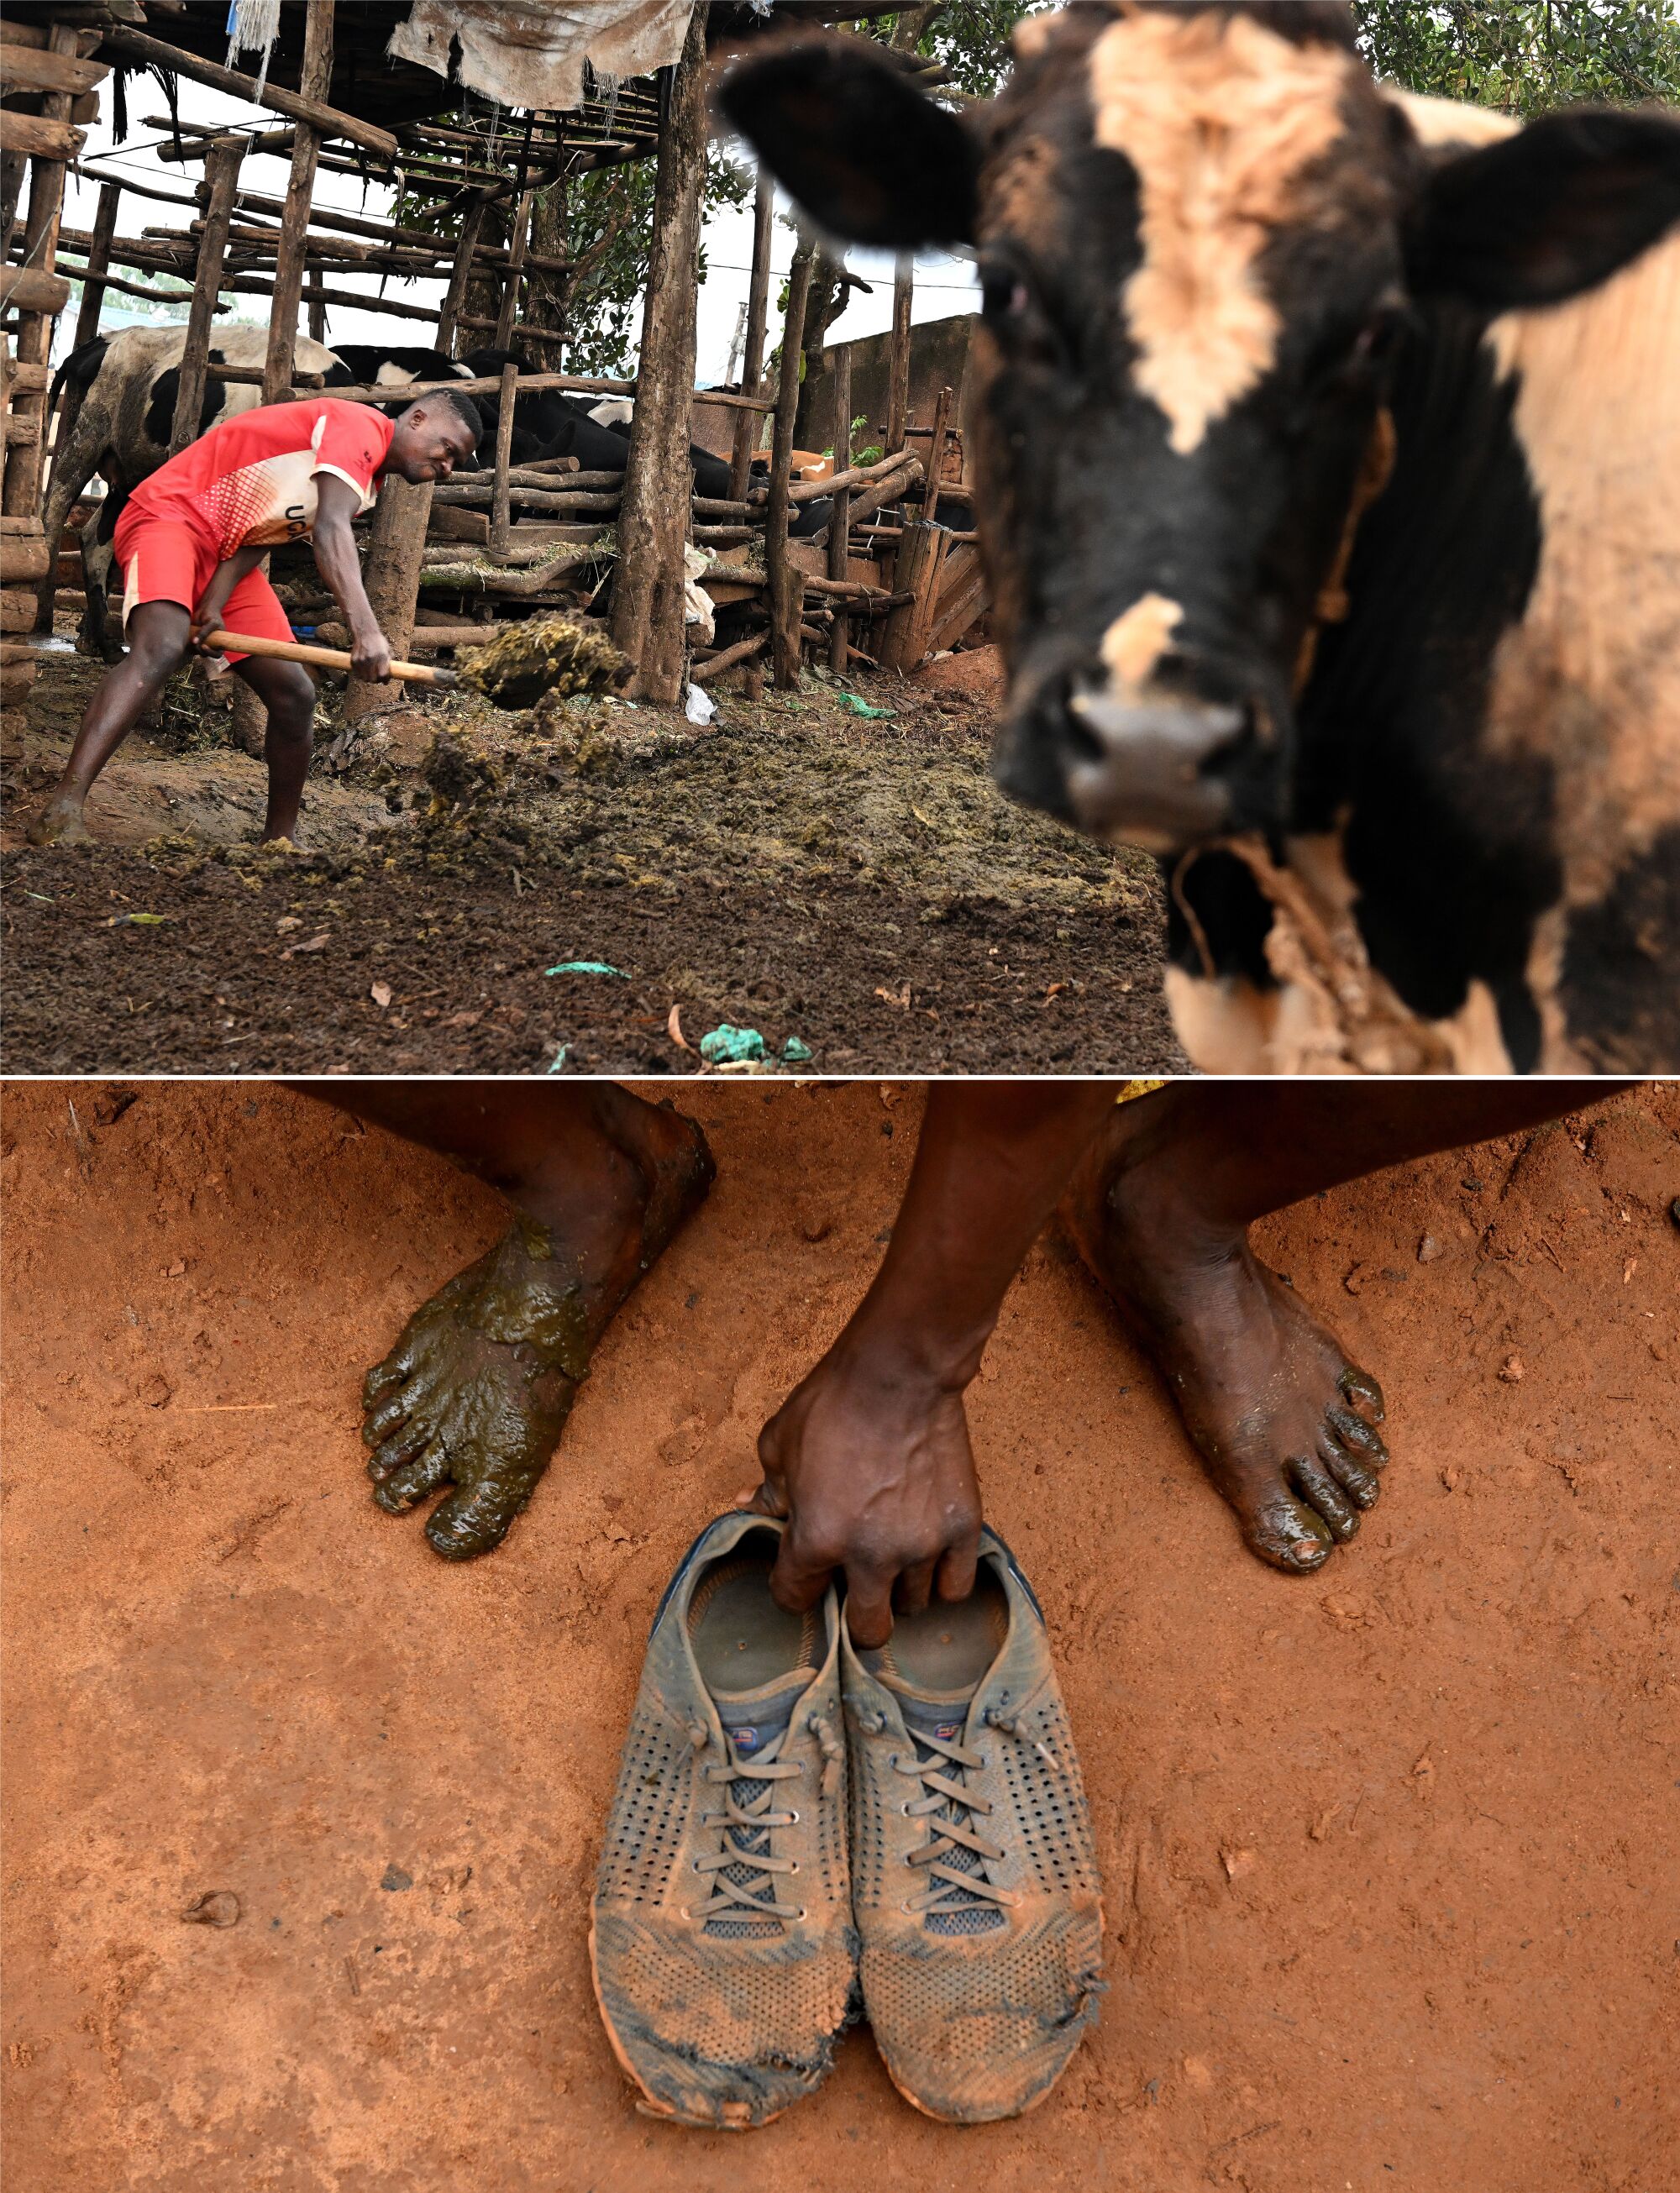 A barefoot Dennis Kasumba shovels cow manure to earn money to feed his family.